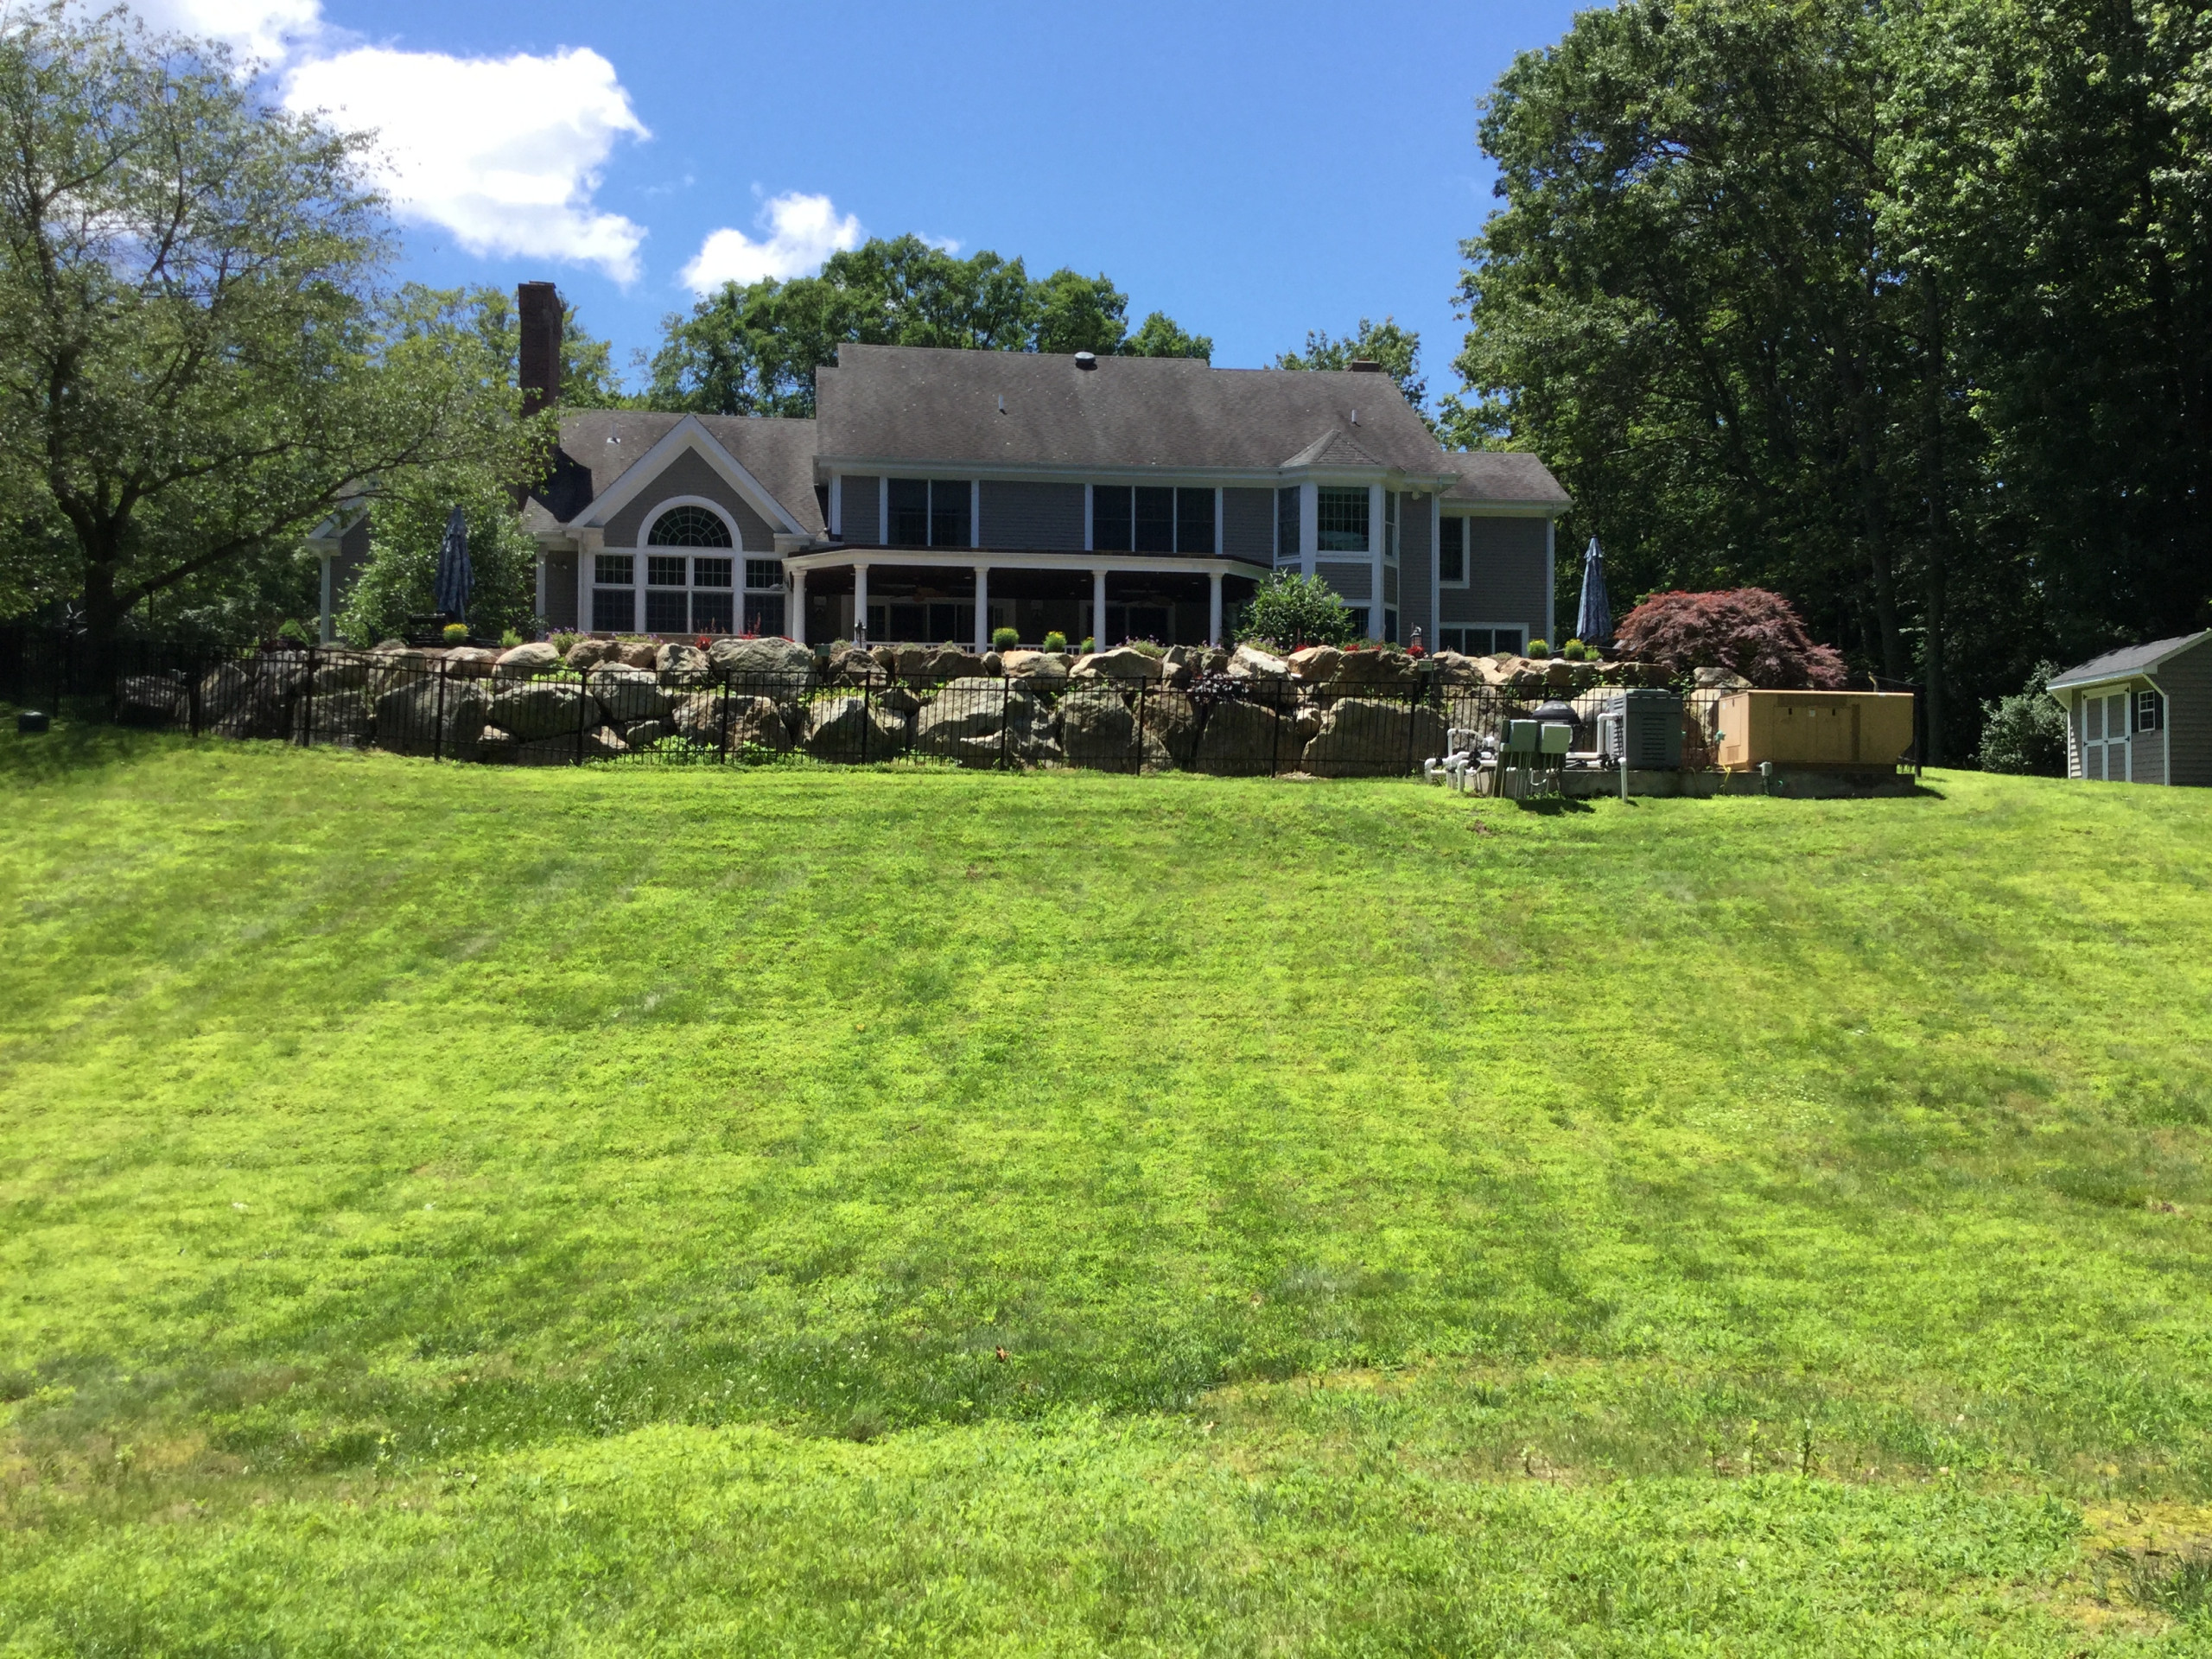 Pound Ridge, NY Home. Client asked me what can we do with this hillside. See the pictures to follow.